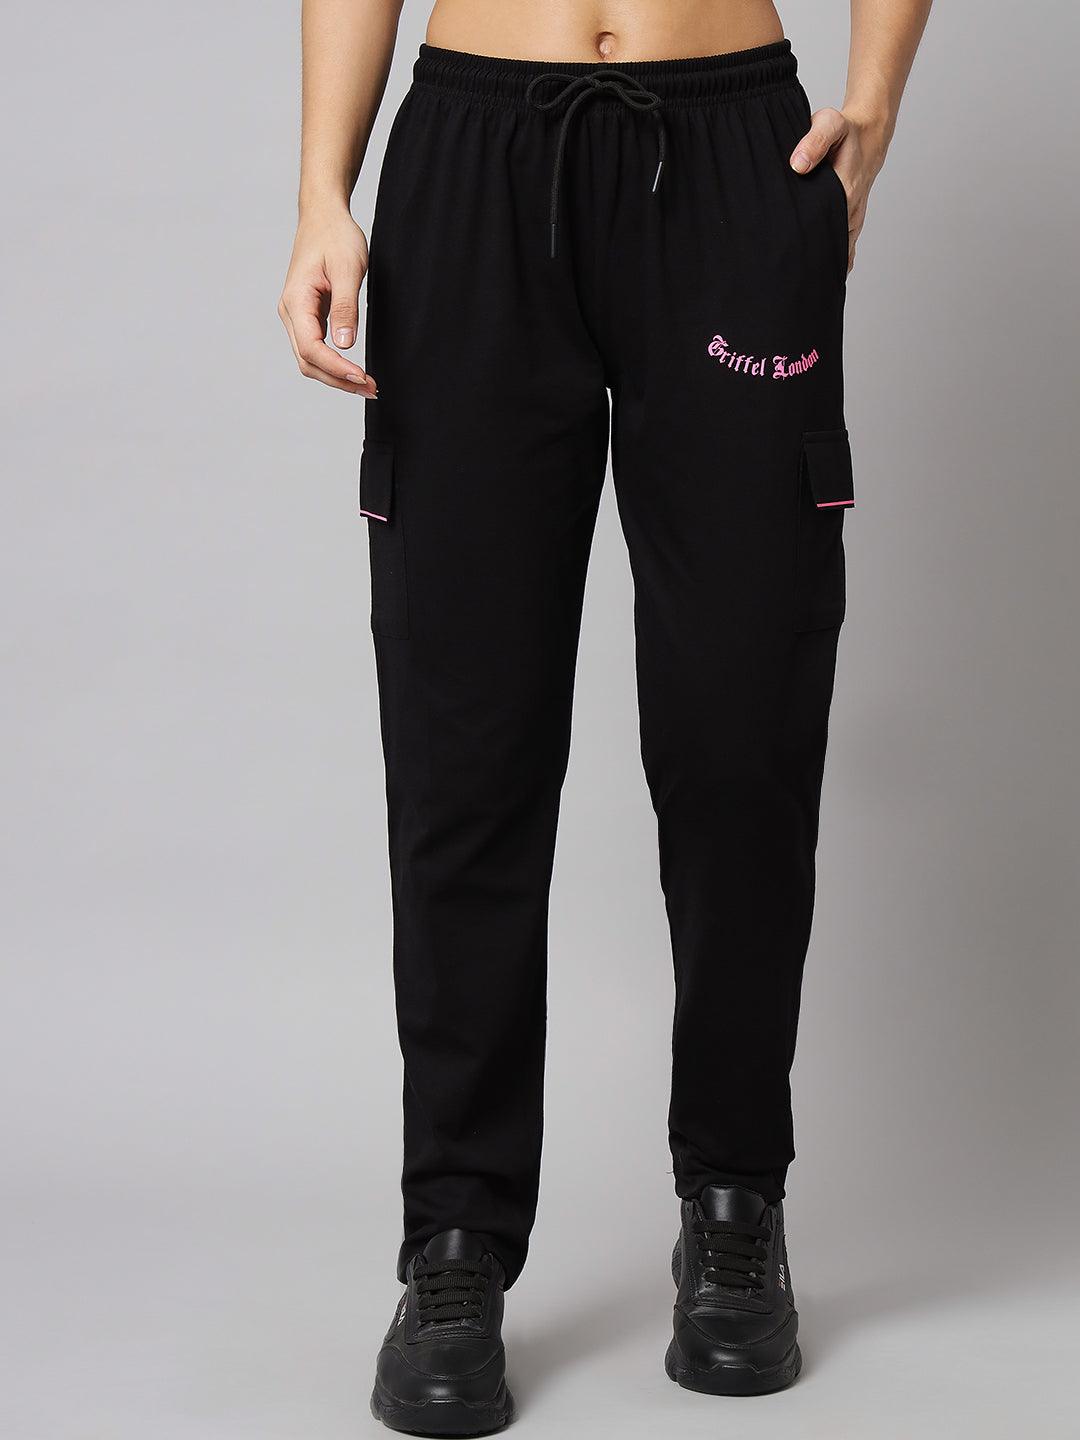 GRIFFEL Women  Printed Black Oversized Loose fit T-shirt and Trackpant Set - griffel